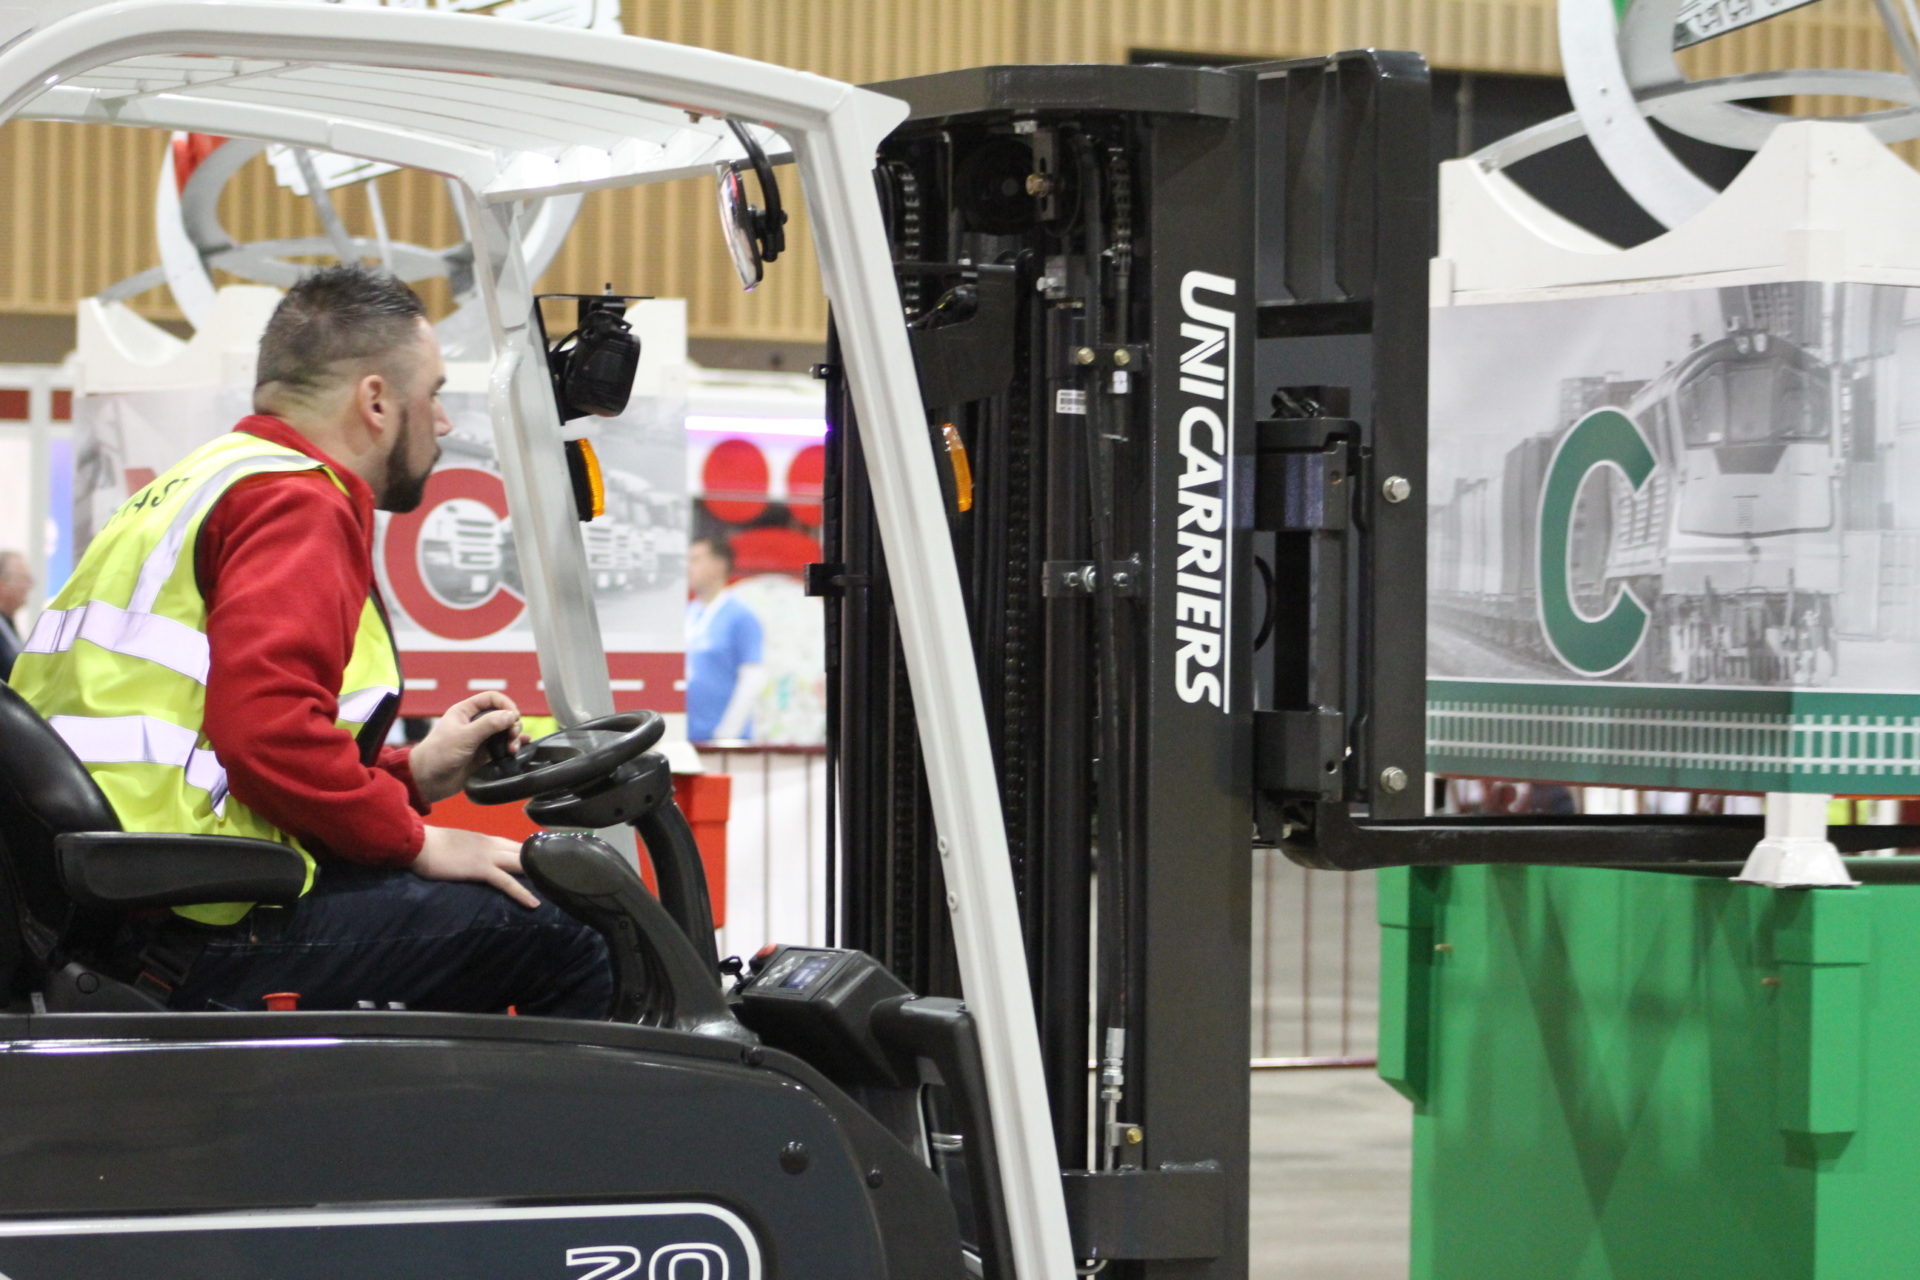 Talent in Logistics puts forklift operators to the test virtually